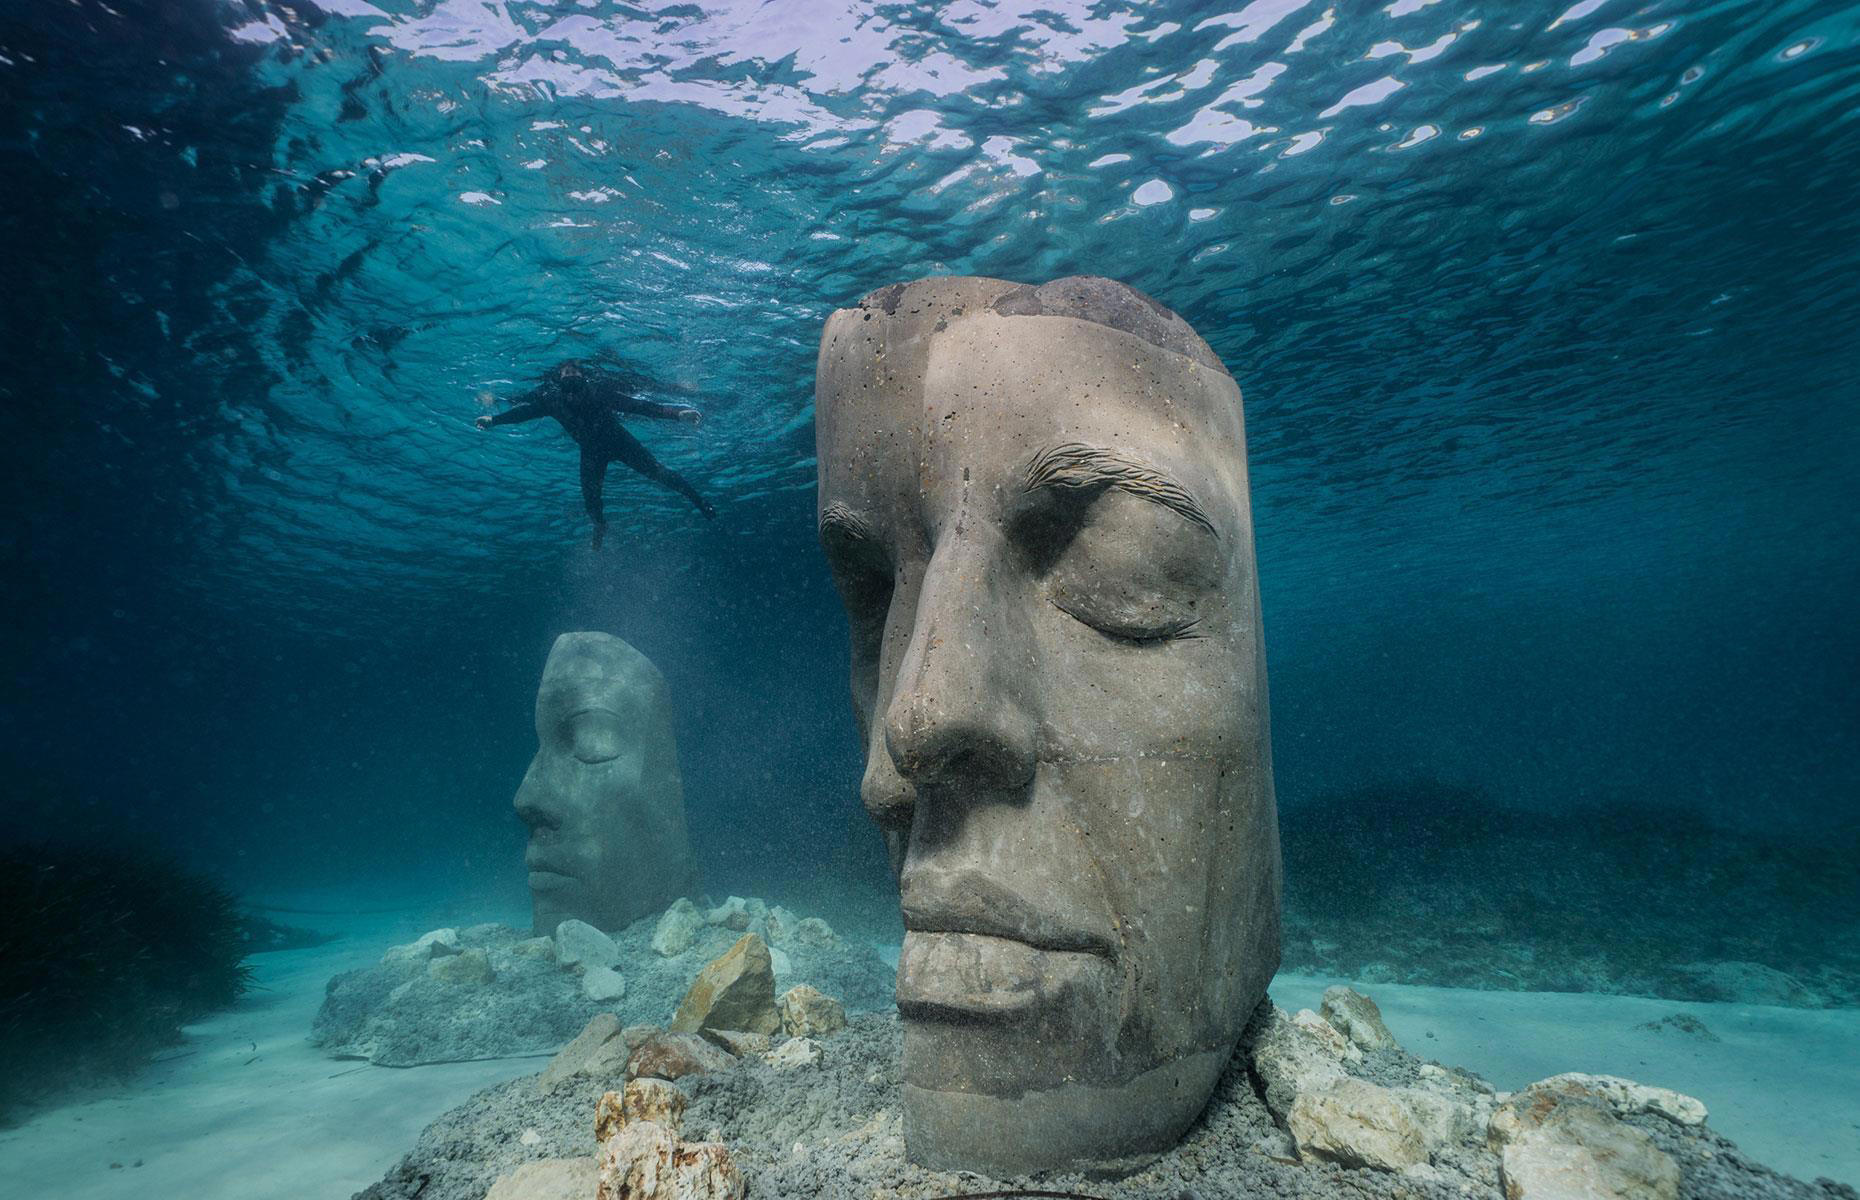 The world's most amazing underwater attractions